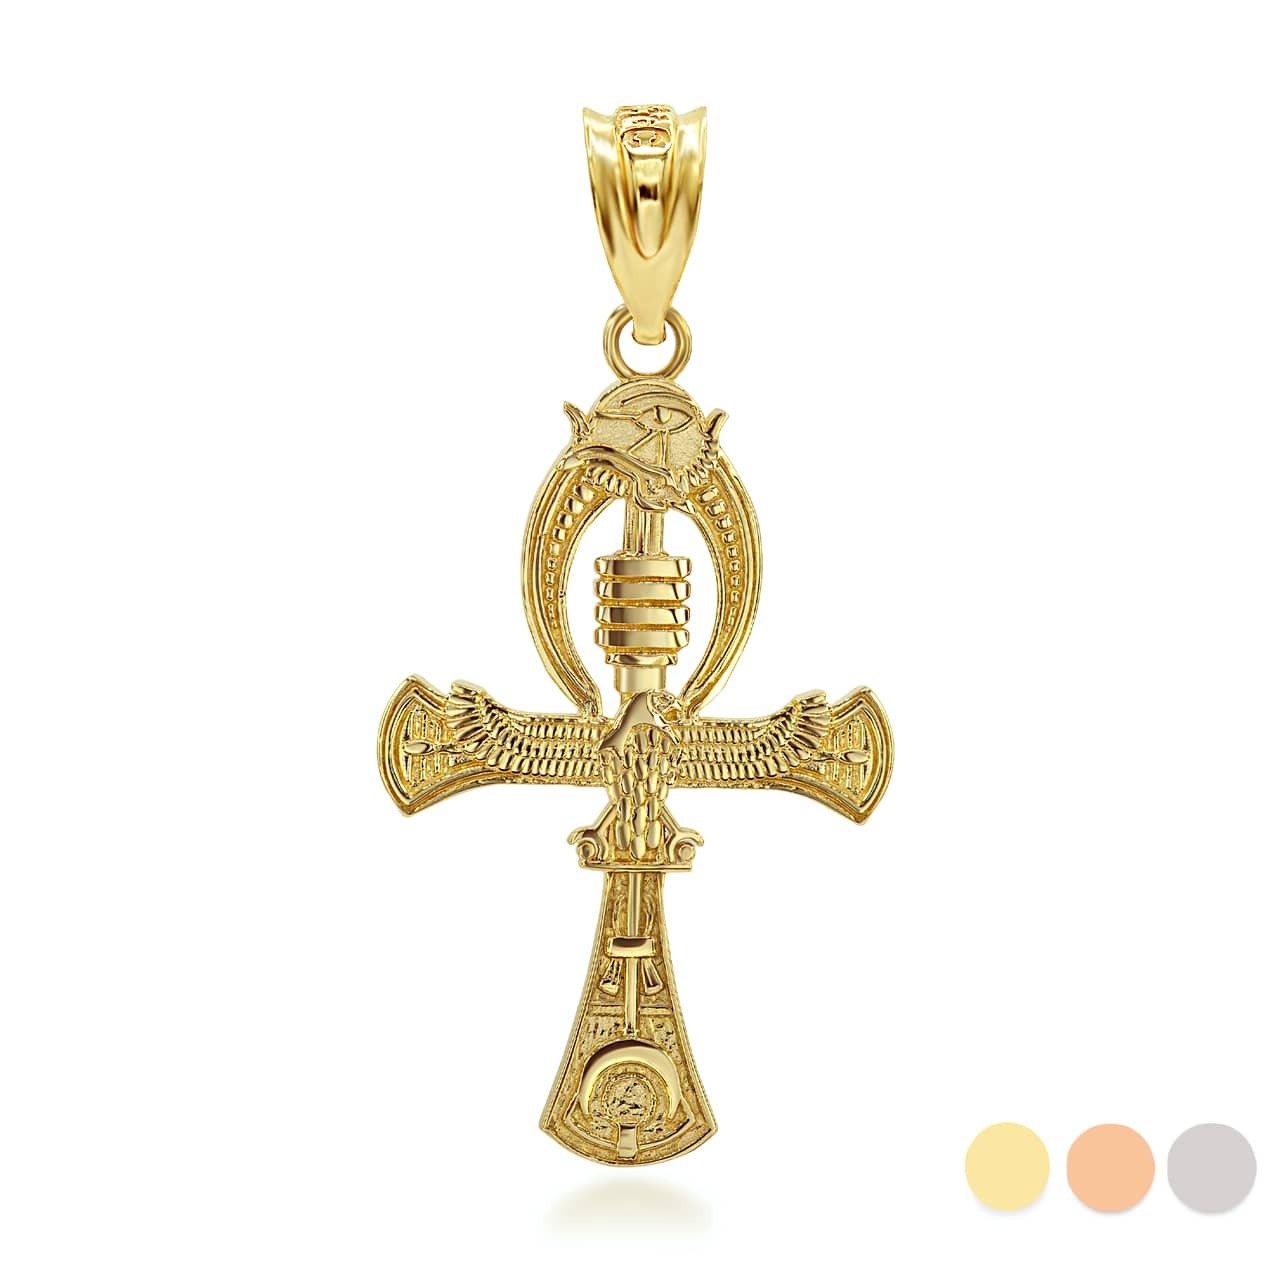 Egyptian Ankh Cross with Hieroglyphs Pendant in Gold - Helloice Jewelry